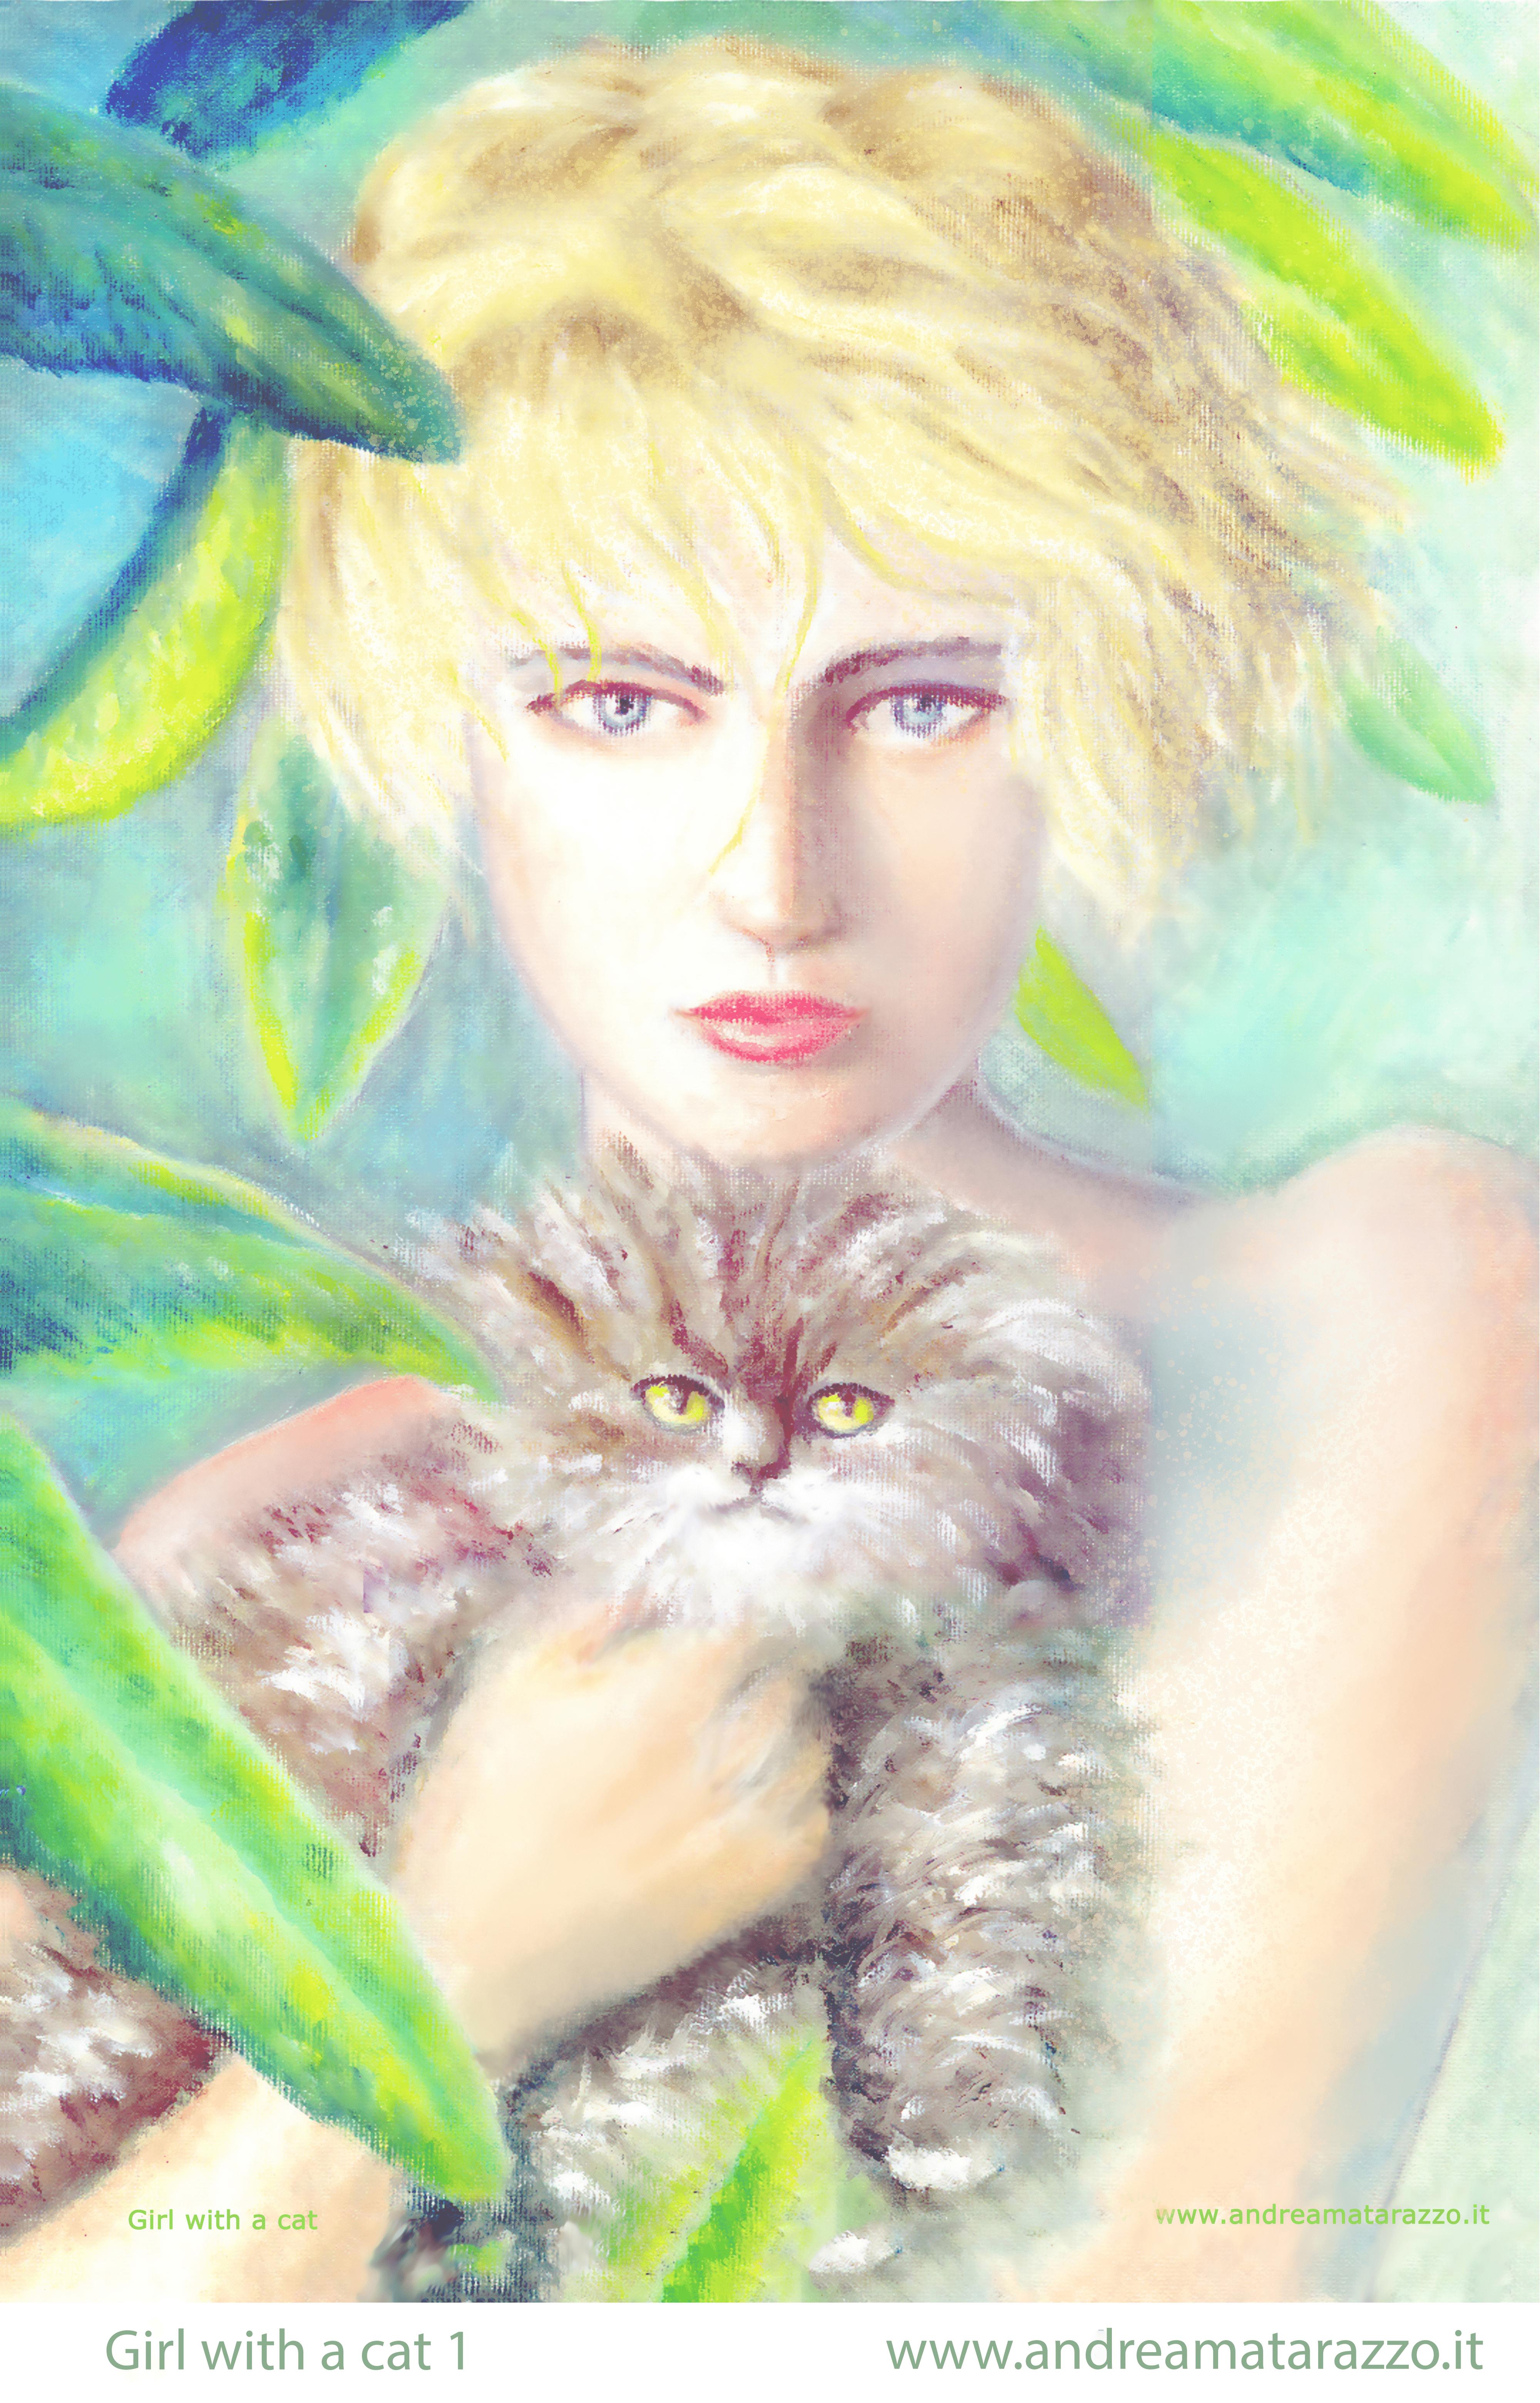 Girl with a cat 1